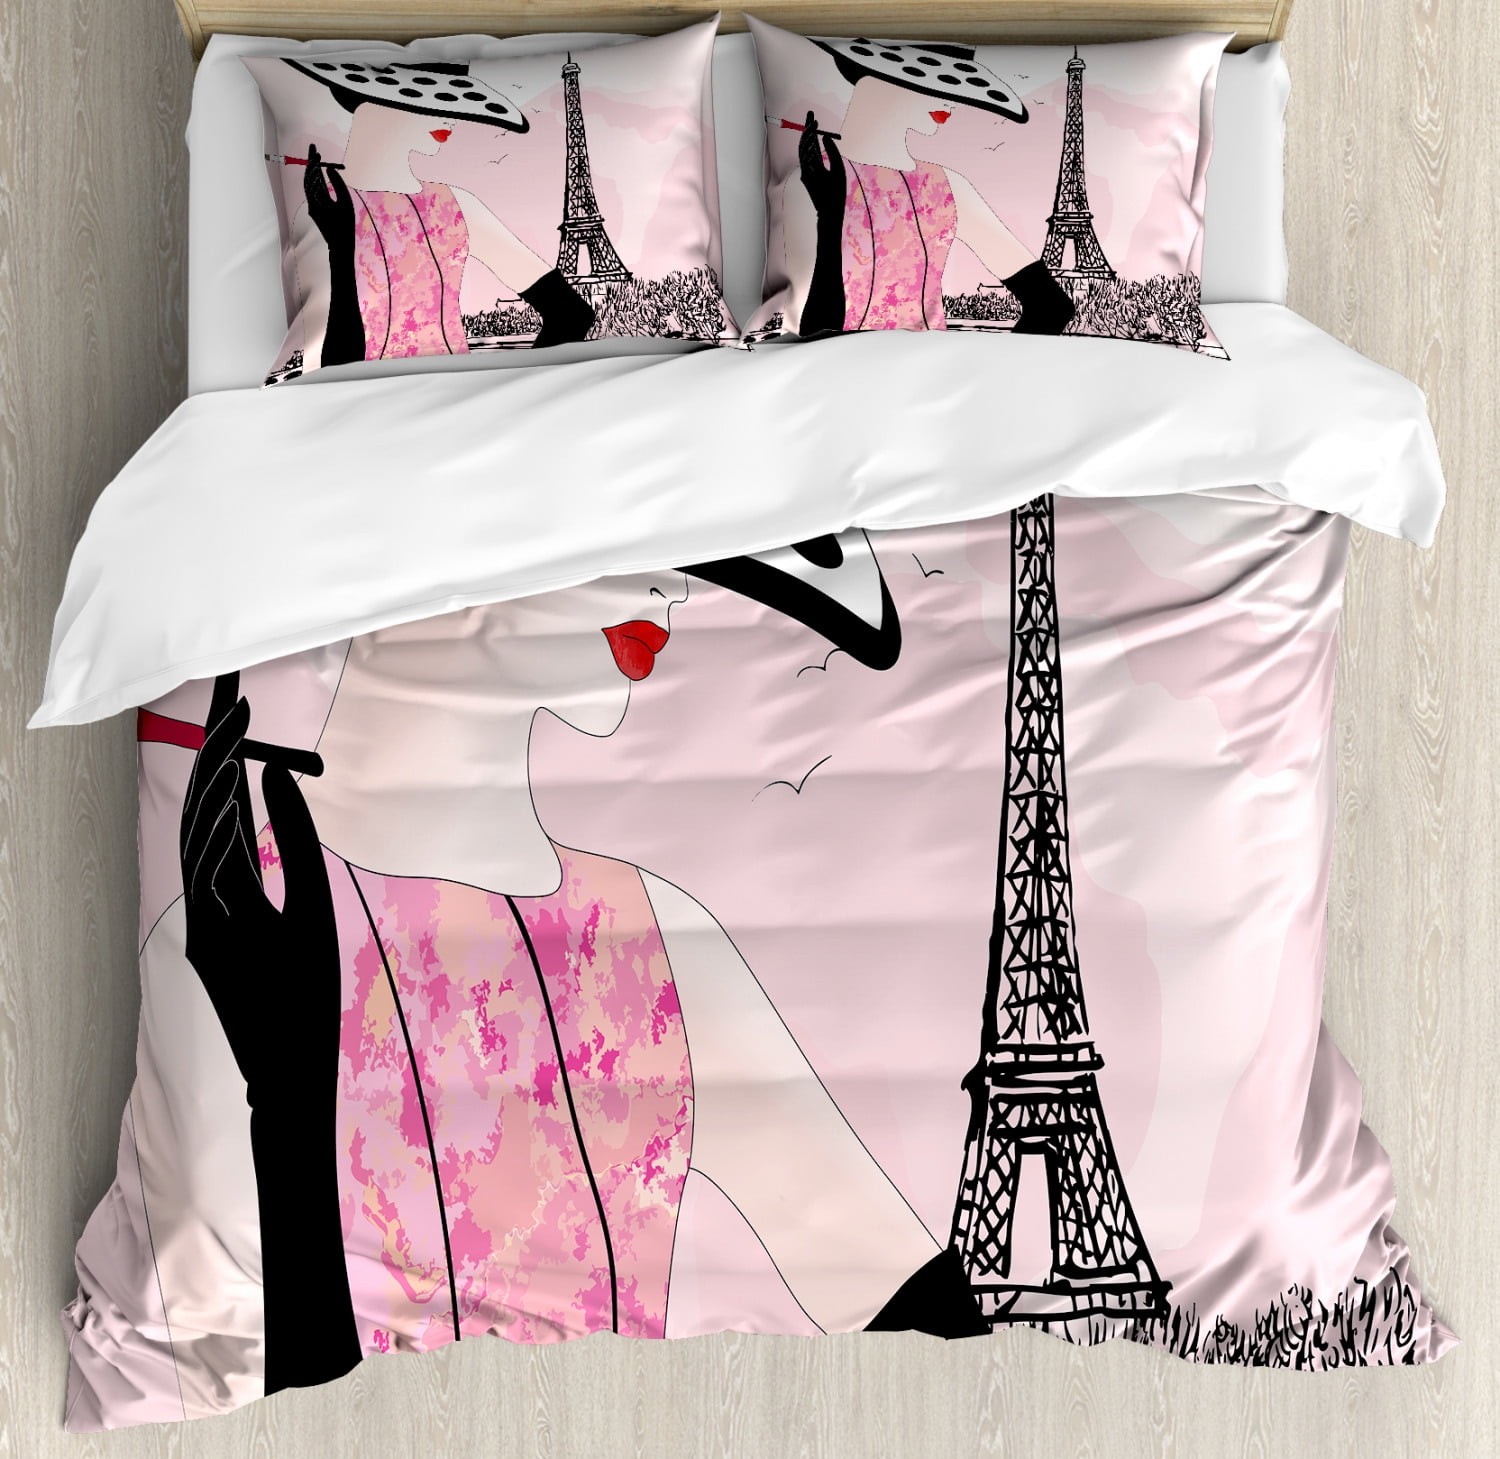 Paris Cityscape Bedding Set for Girls Boys Children Eiffel Tower Comforter Cover Decorative Modern French Style Duvet Cover Trip Design Sunset Bedspread Cover Full Size 3Pcs Bedclothes 